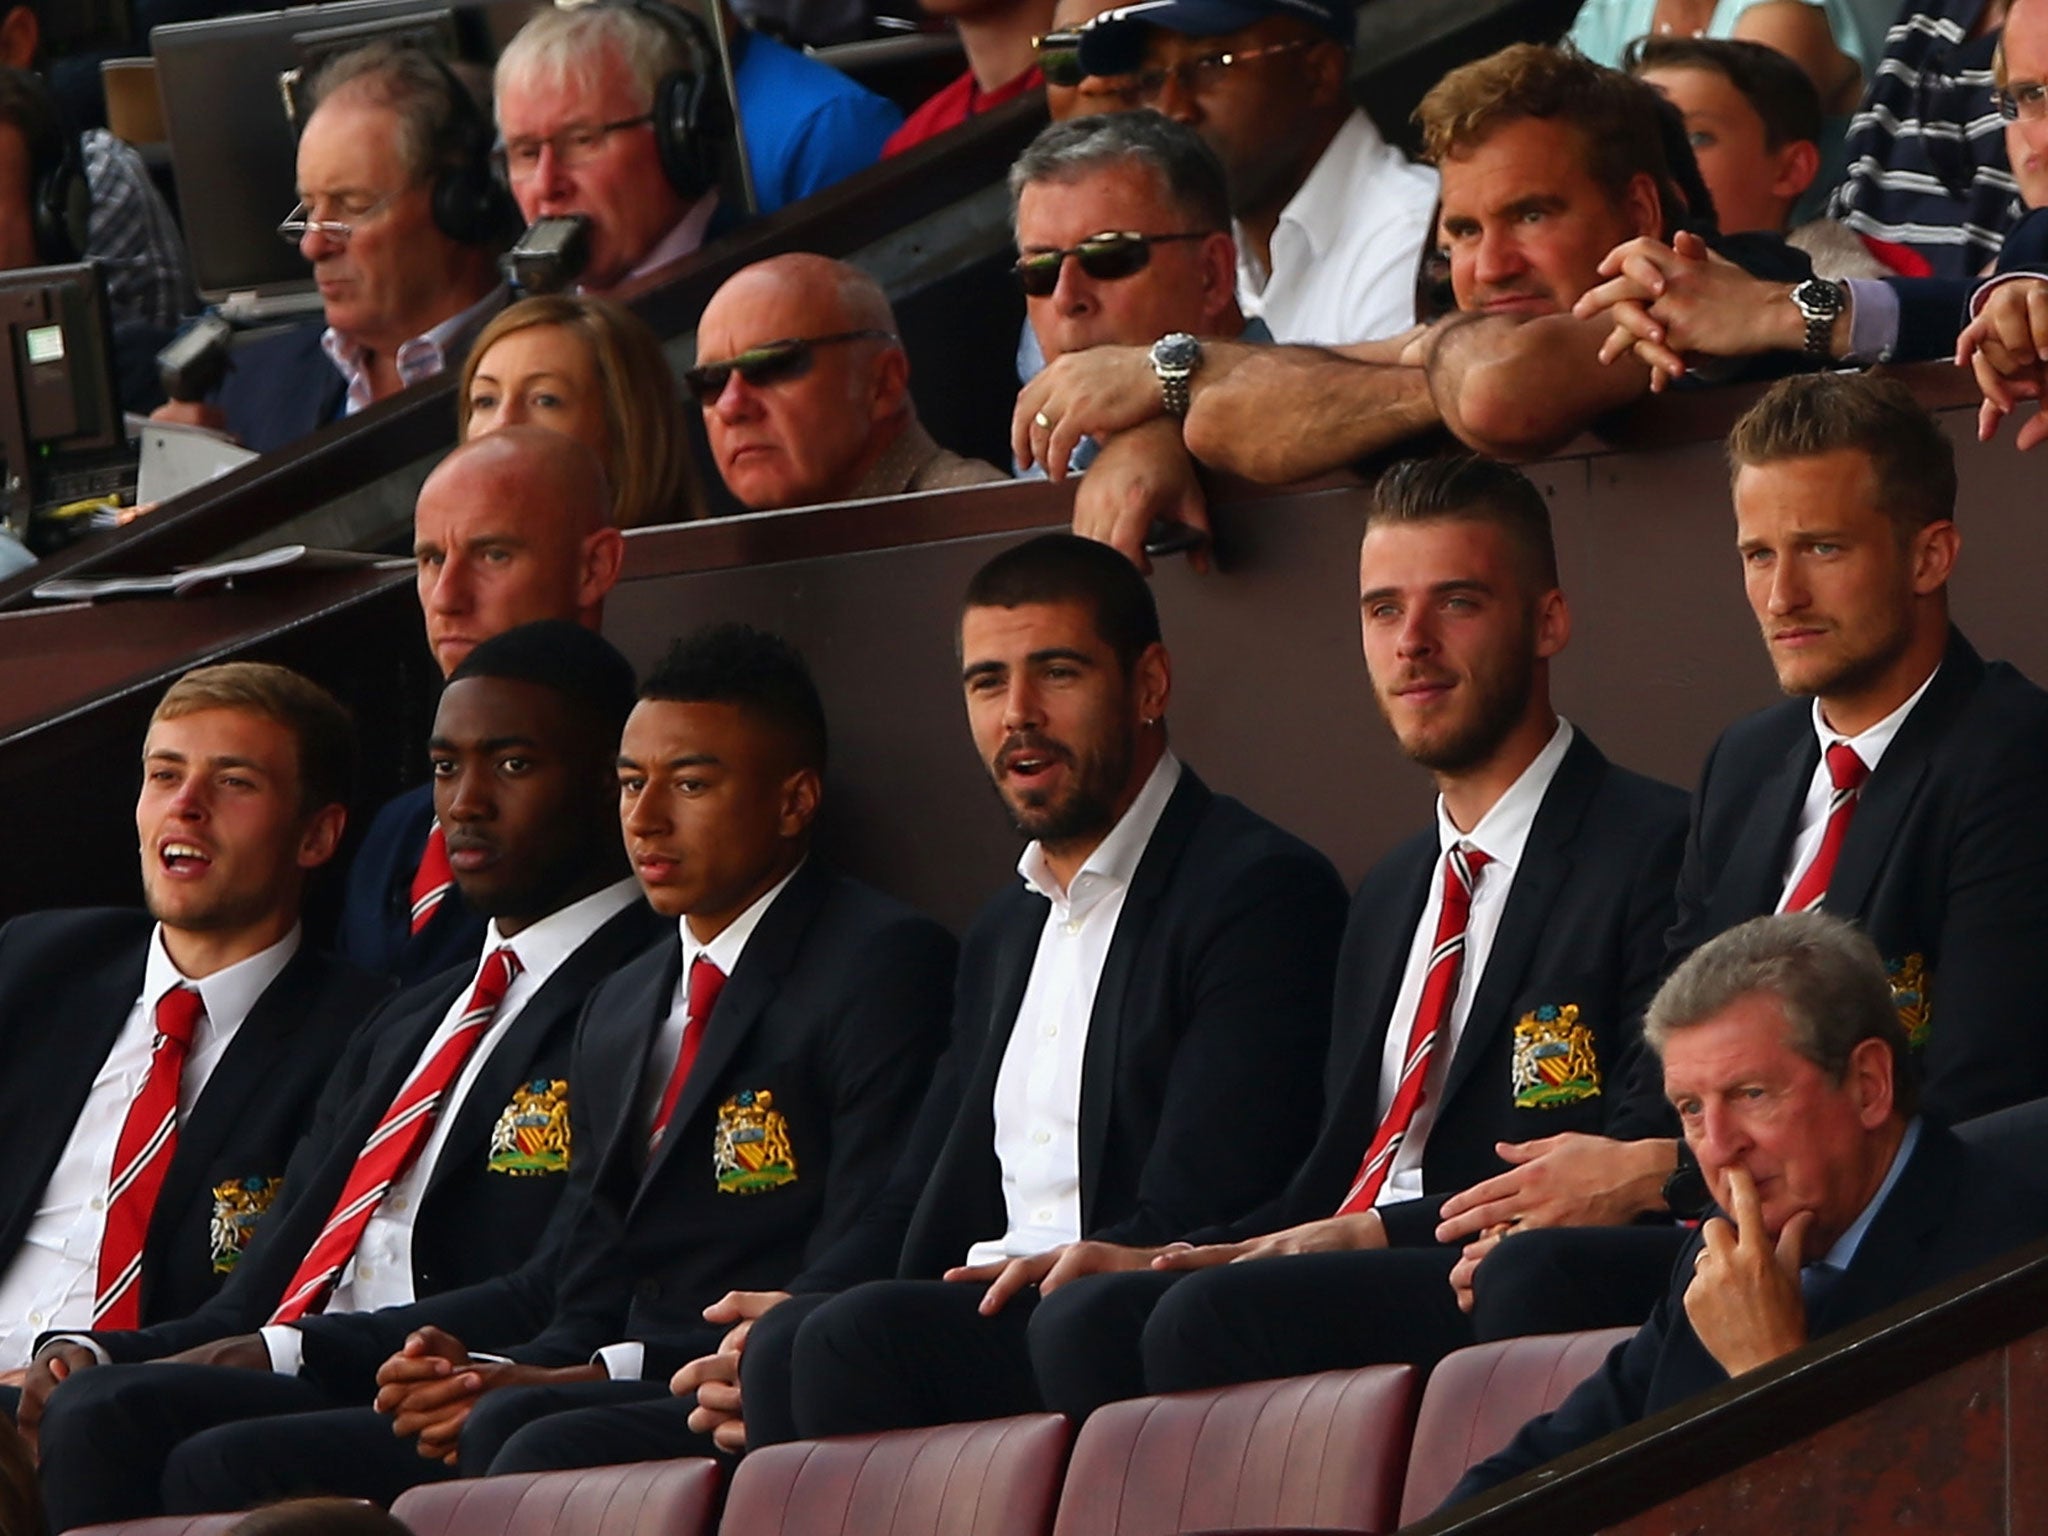 Victor Valdes in the stands for Manchester United's match with Tottenham